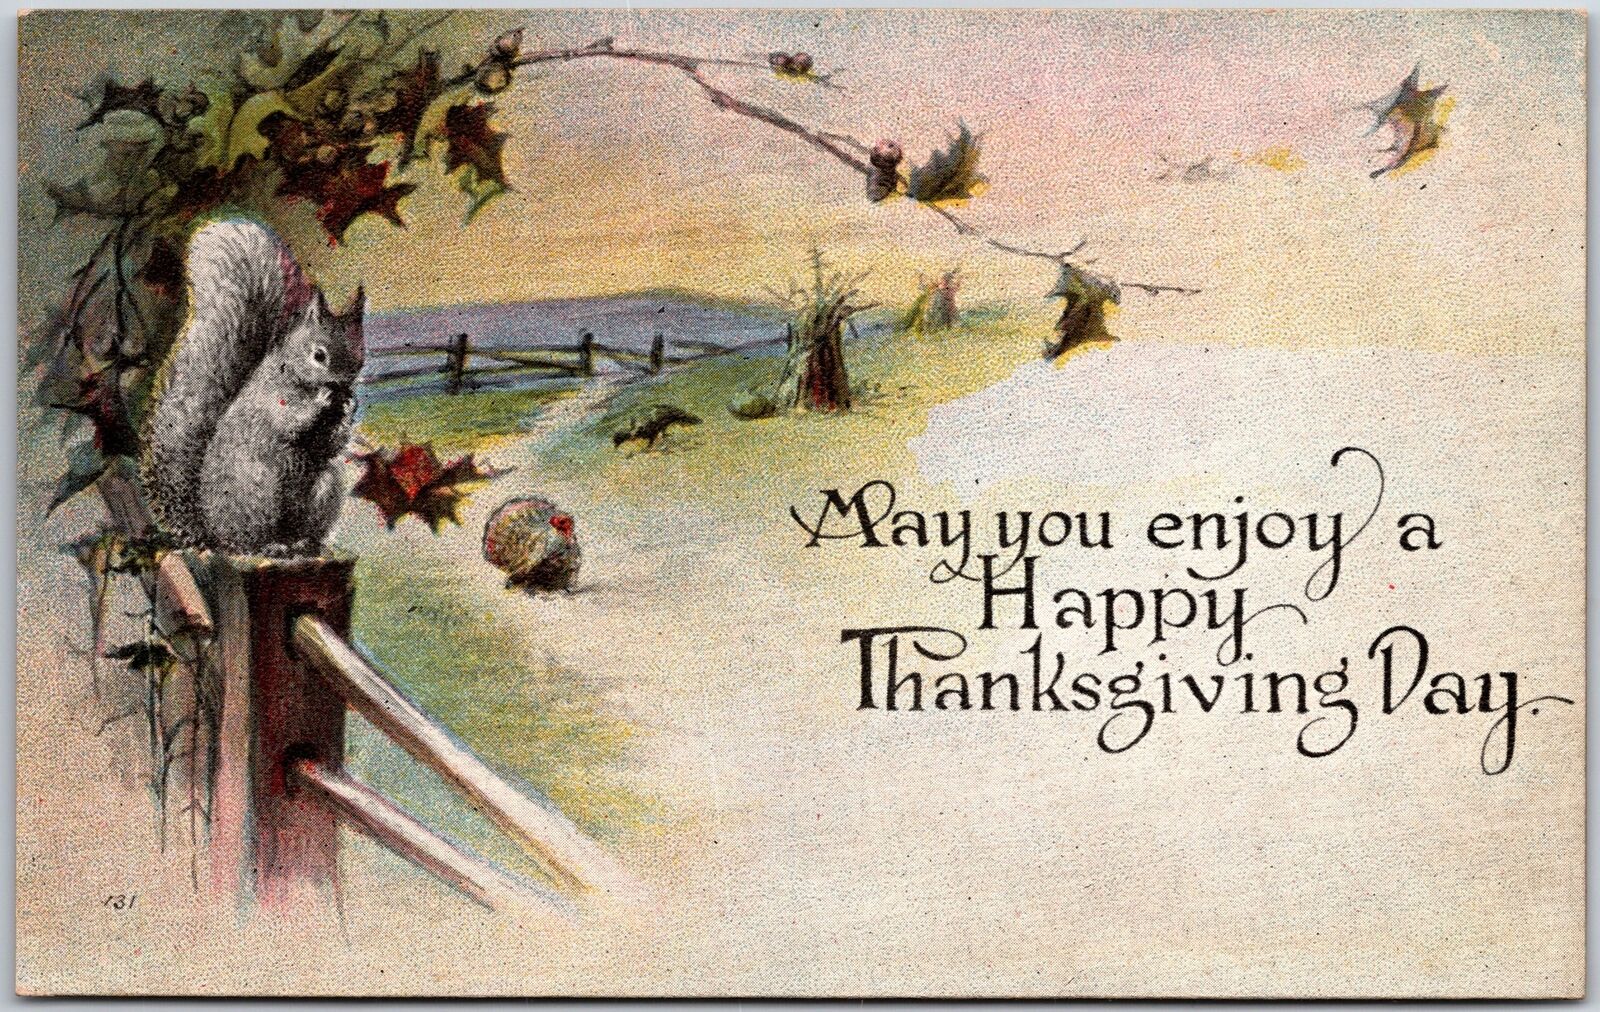 May You Enjoy a Happy Thanksgiving, Greetings Card, Holiday, Vintage Postcard